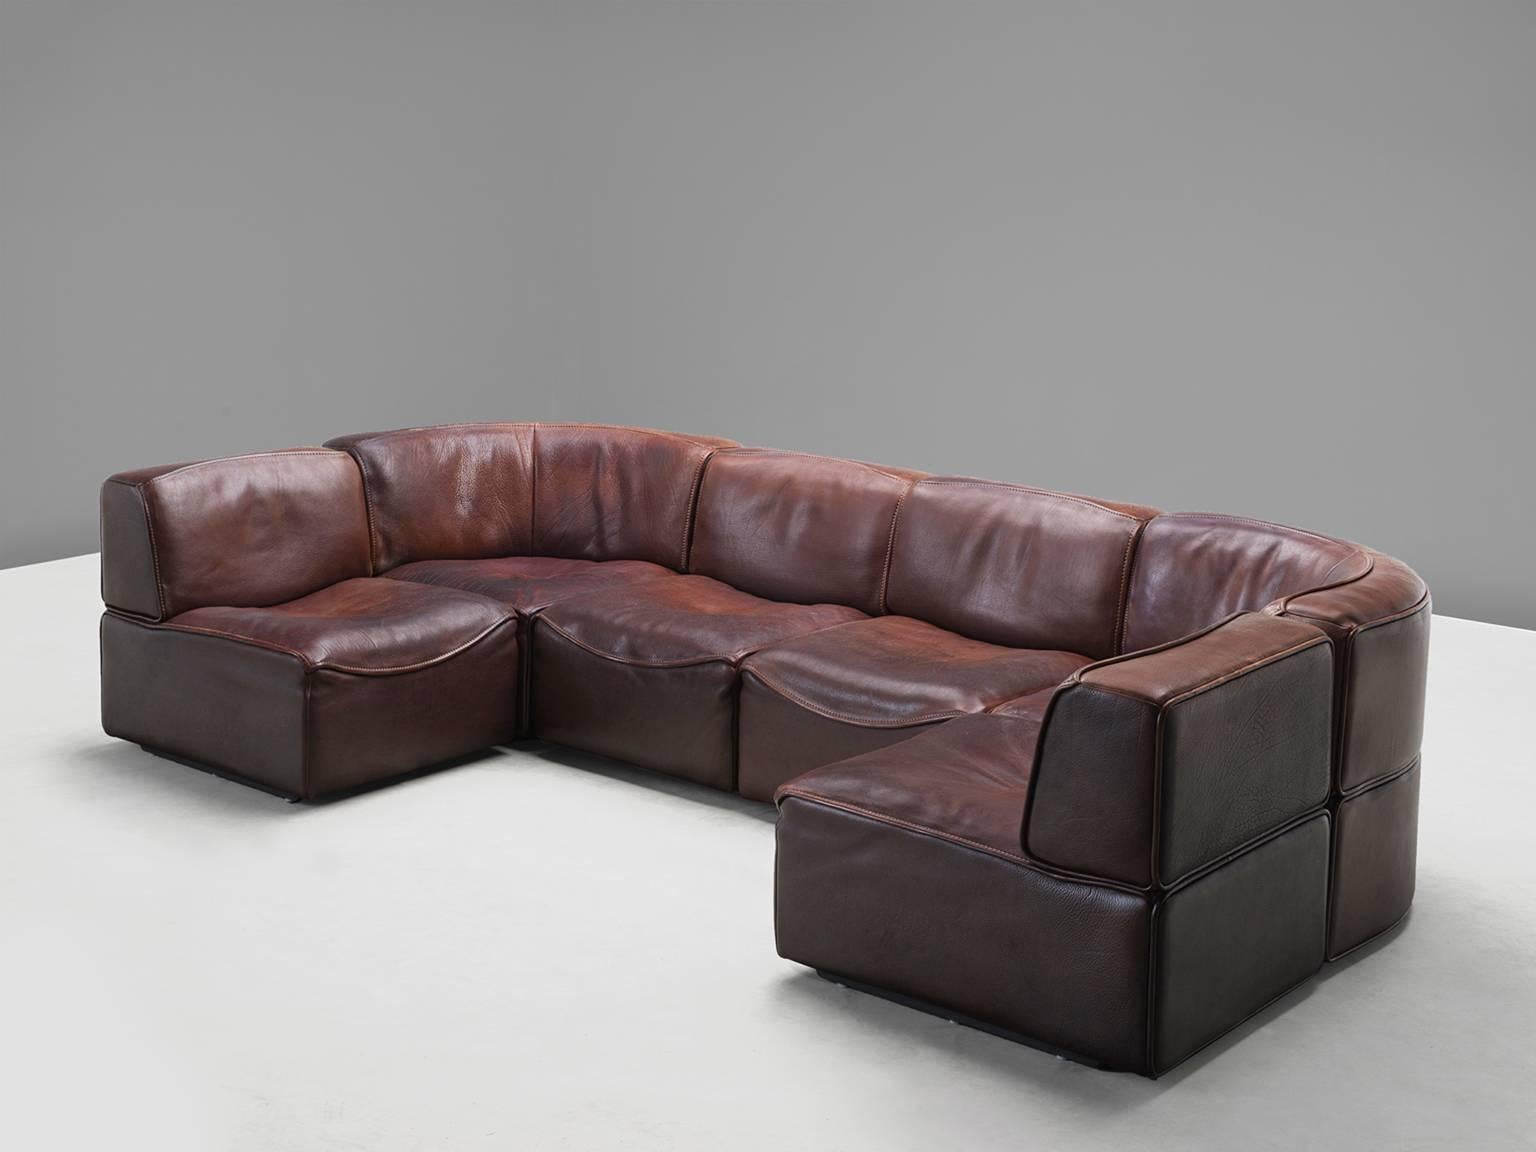 Sectional sofa model DS-15, in leather by De Sede, Switzerland, 1970s. 

This sectional sofa contains two corner elements, four normal elements. The section make it possible to arrange this sofa to your own wishes. The design is simplistic yet